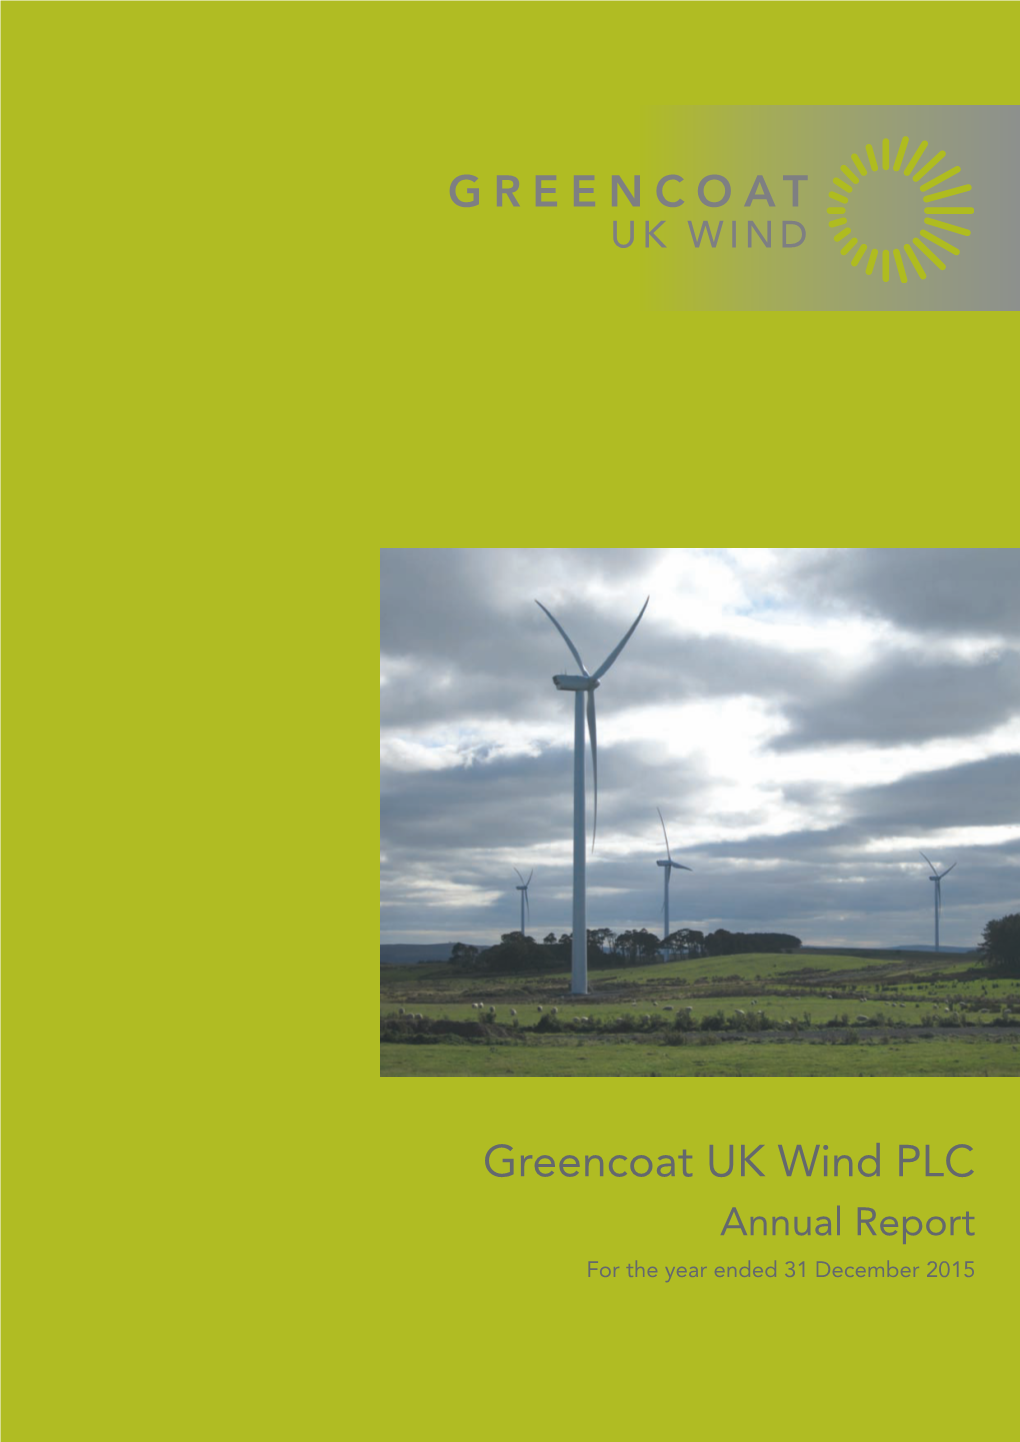 Greencoat UK Wind PLC Annual Report for the Year Ended 31 December 2015 18821 Greencoatannual Report:Layout1 19/02/2016 10:57 Page 1